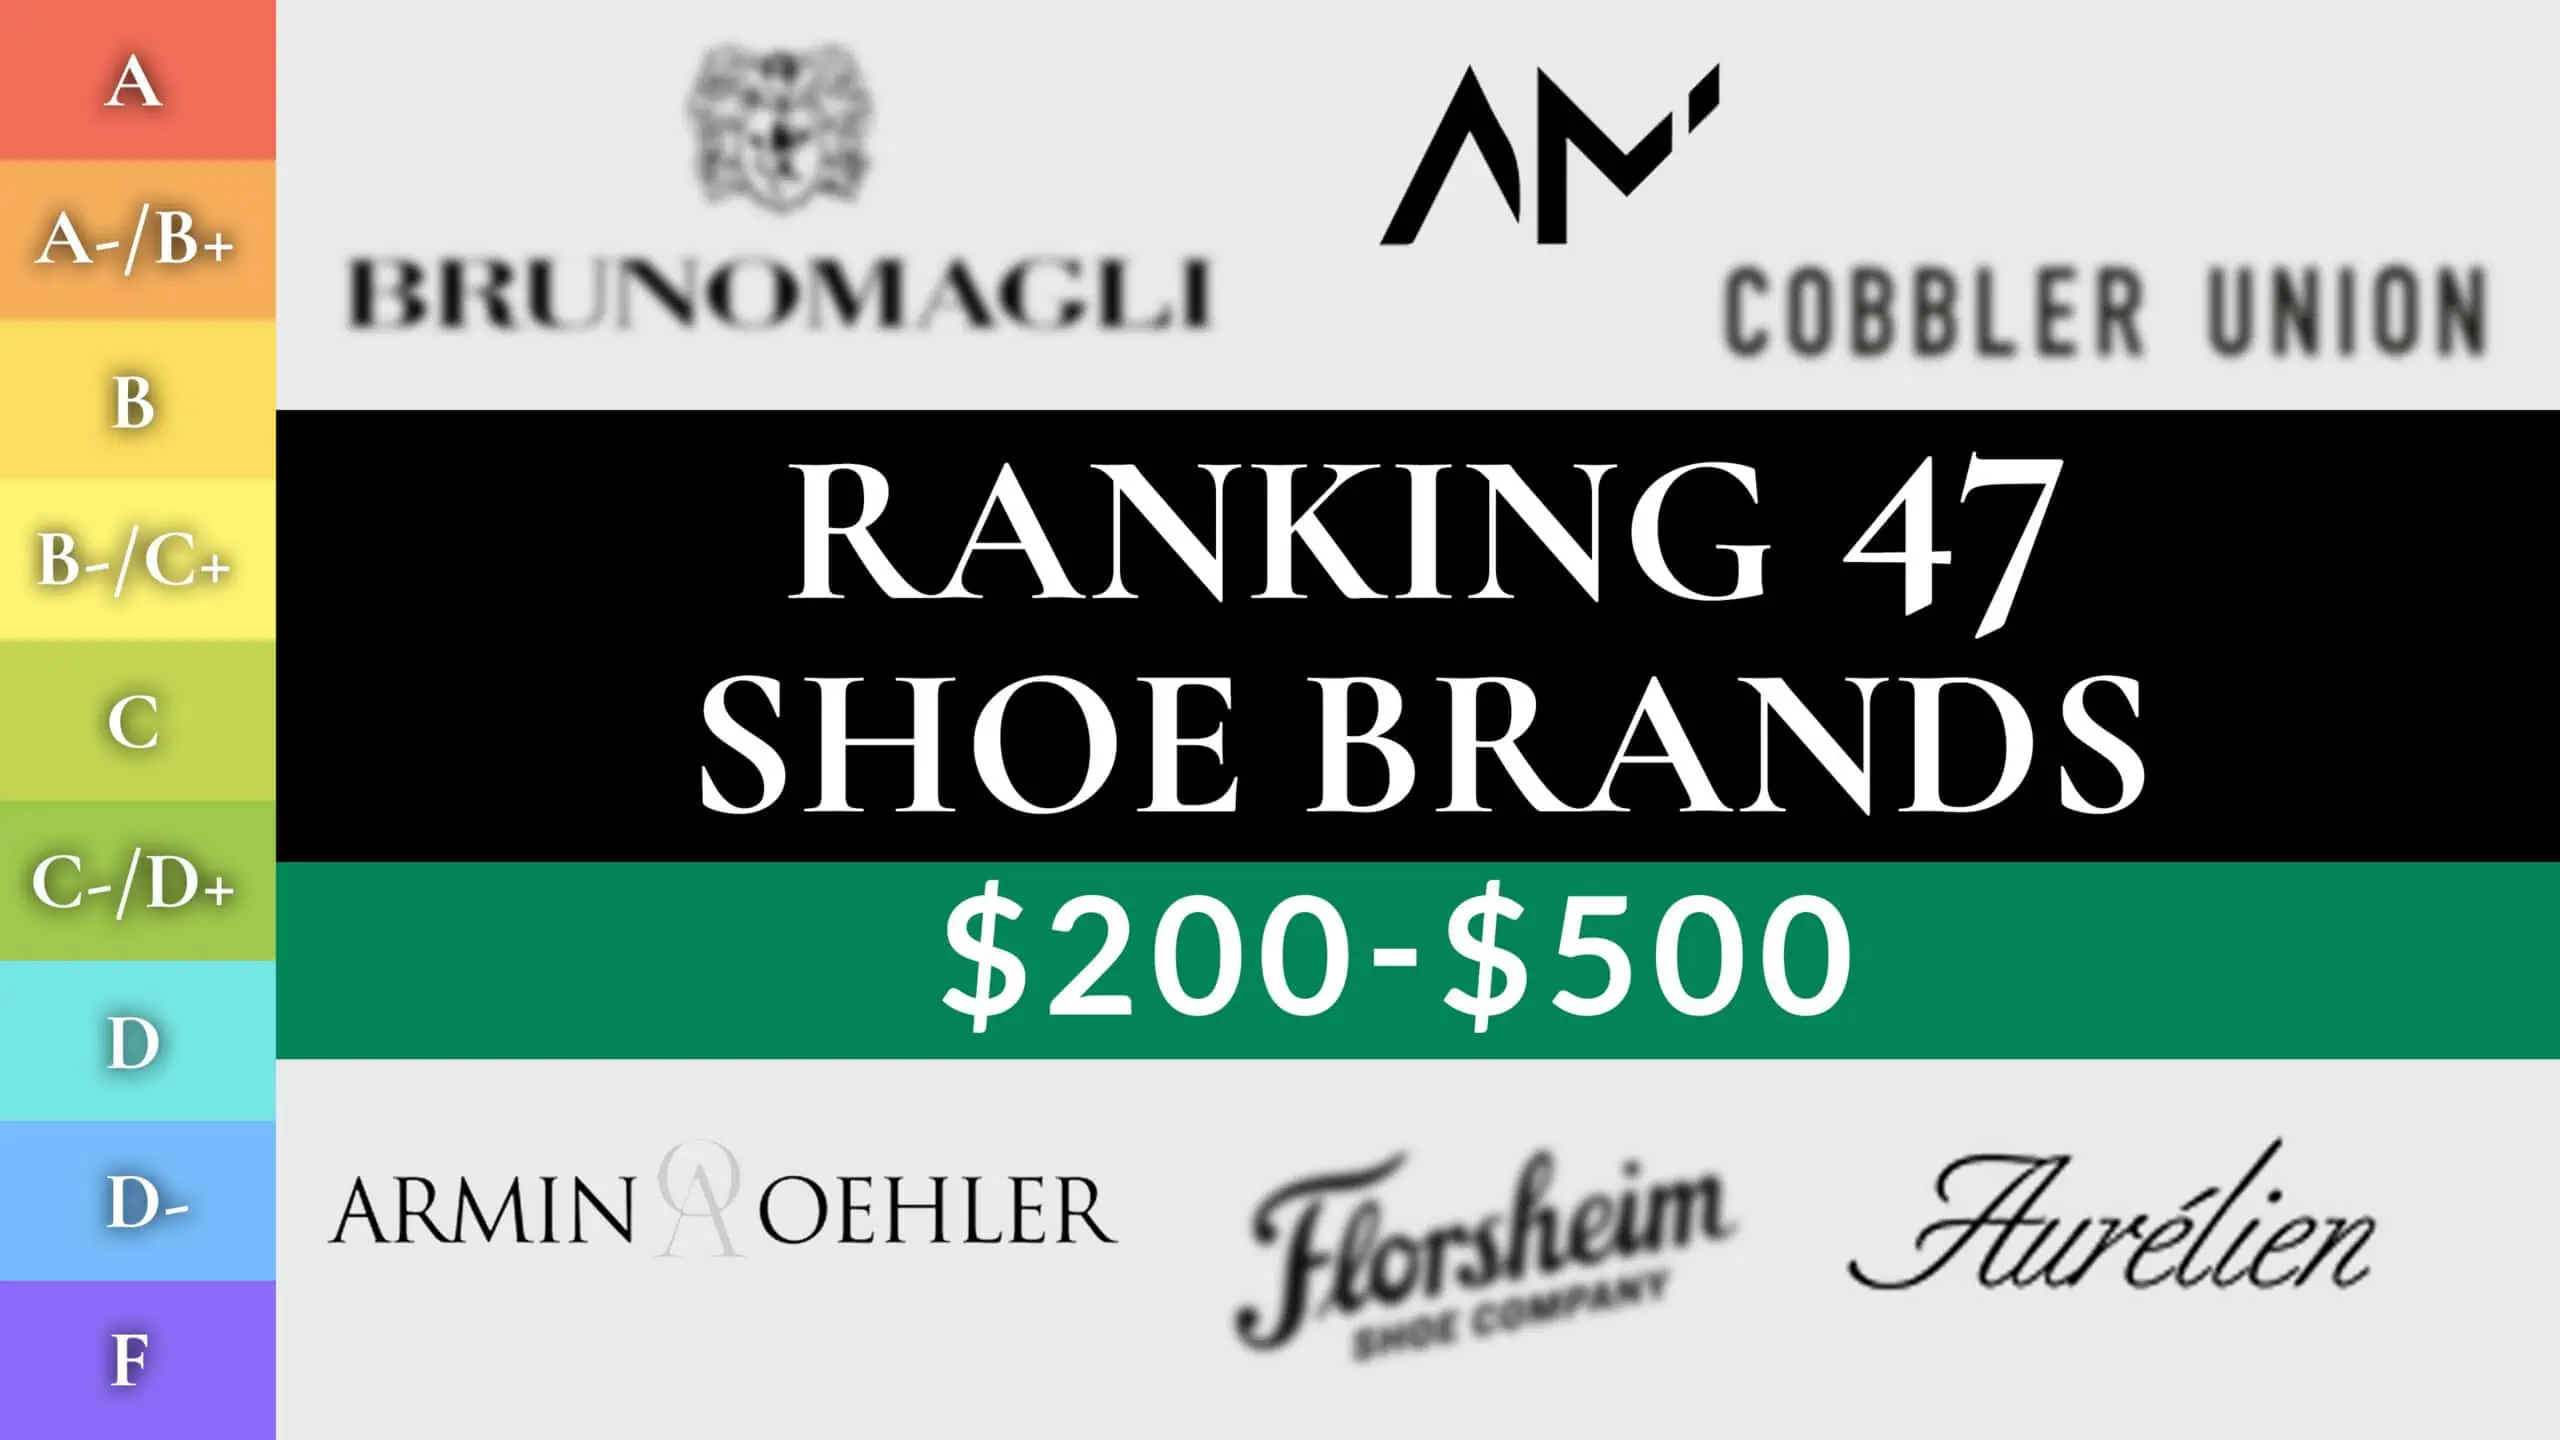 Ranking 47 Shoe Brands 3840x2160 scaled